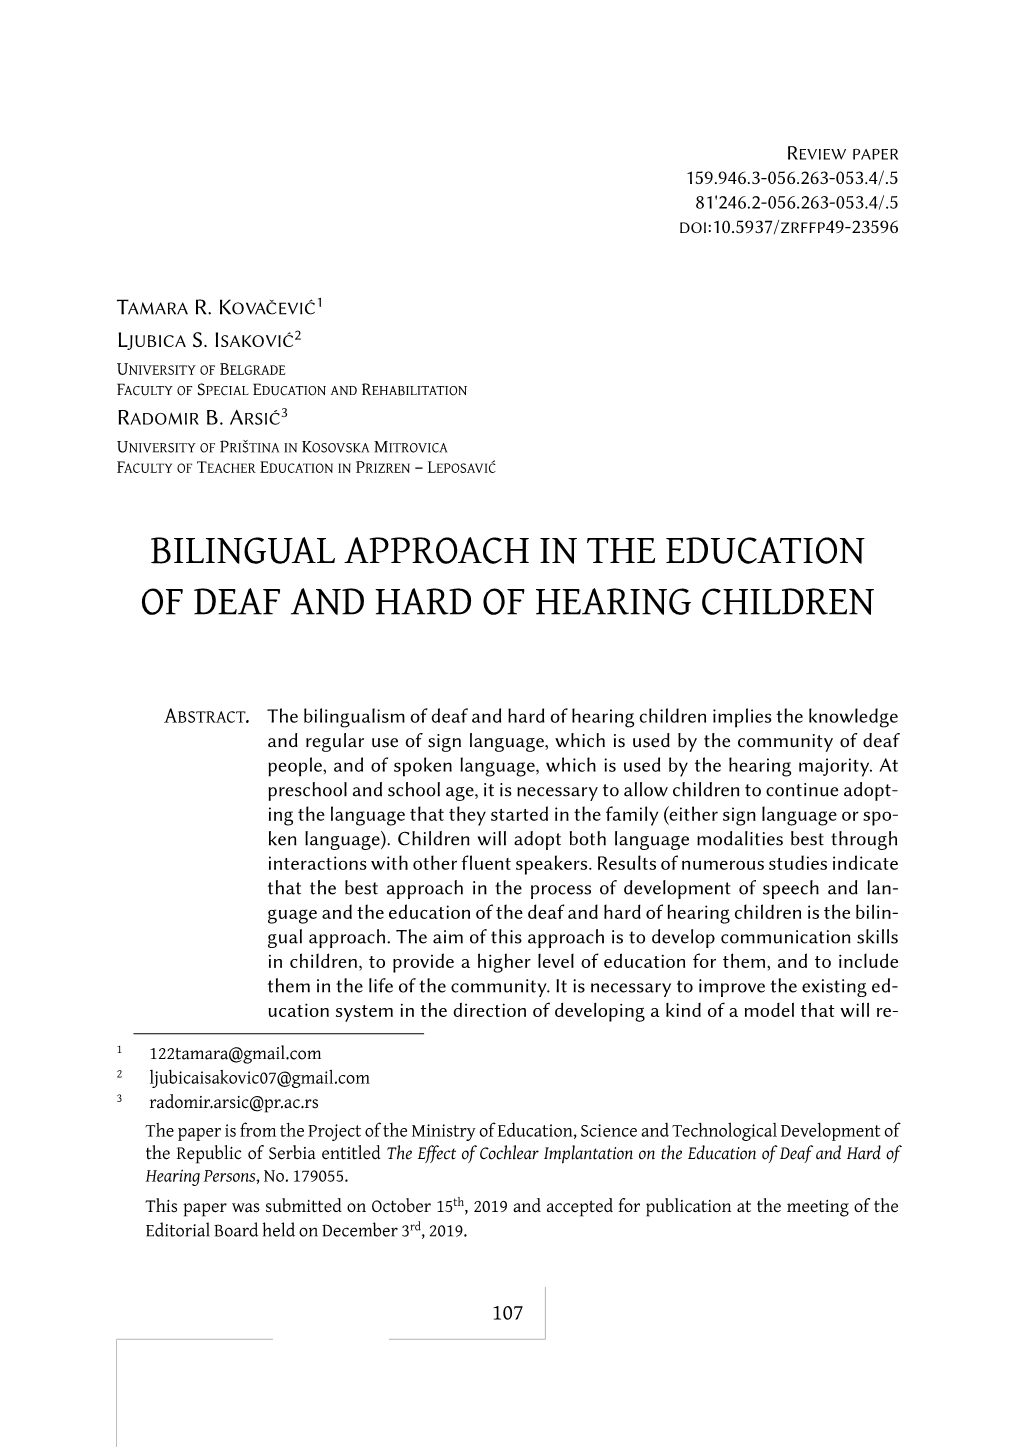 Bilingual Approach in the Education of Deaf and Hard of Hearing Children